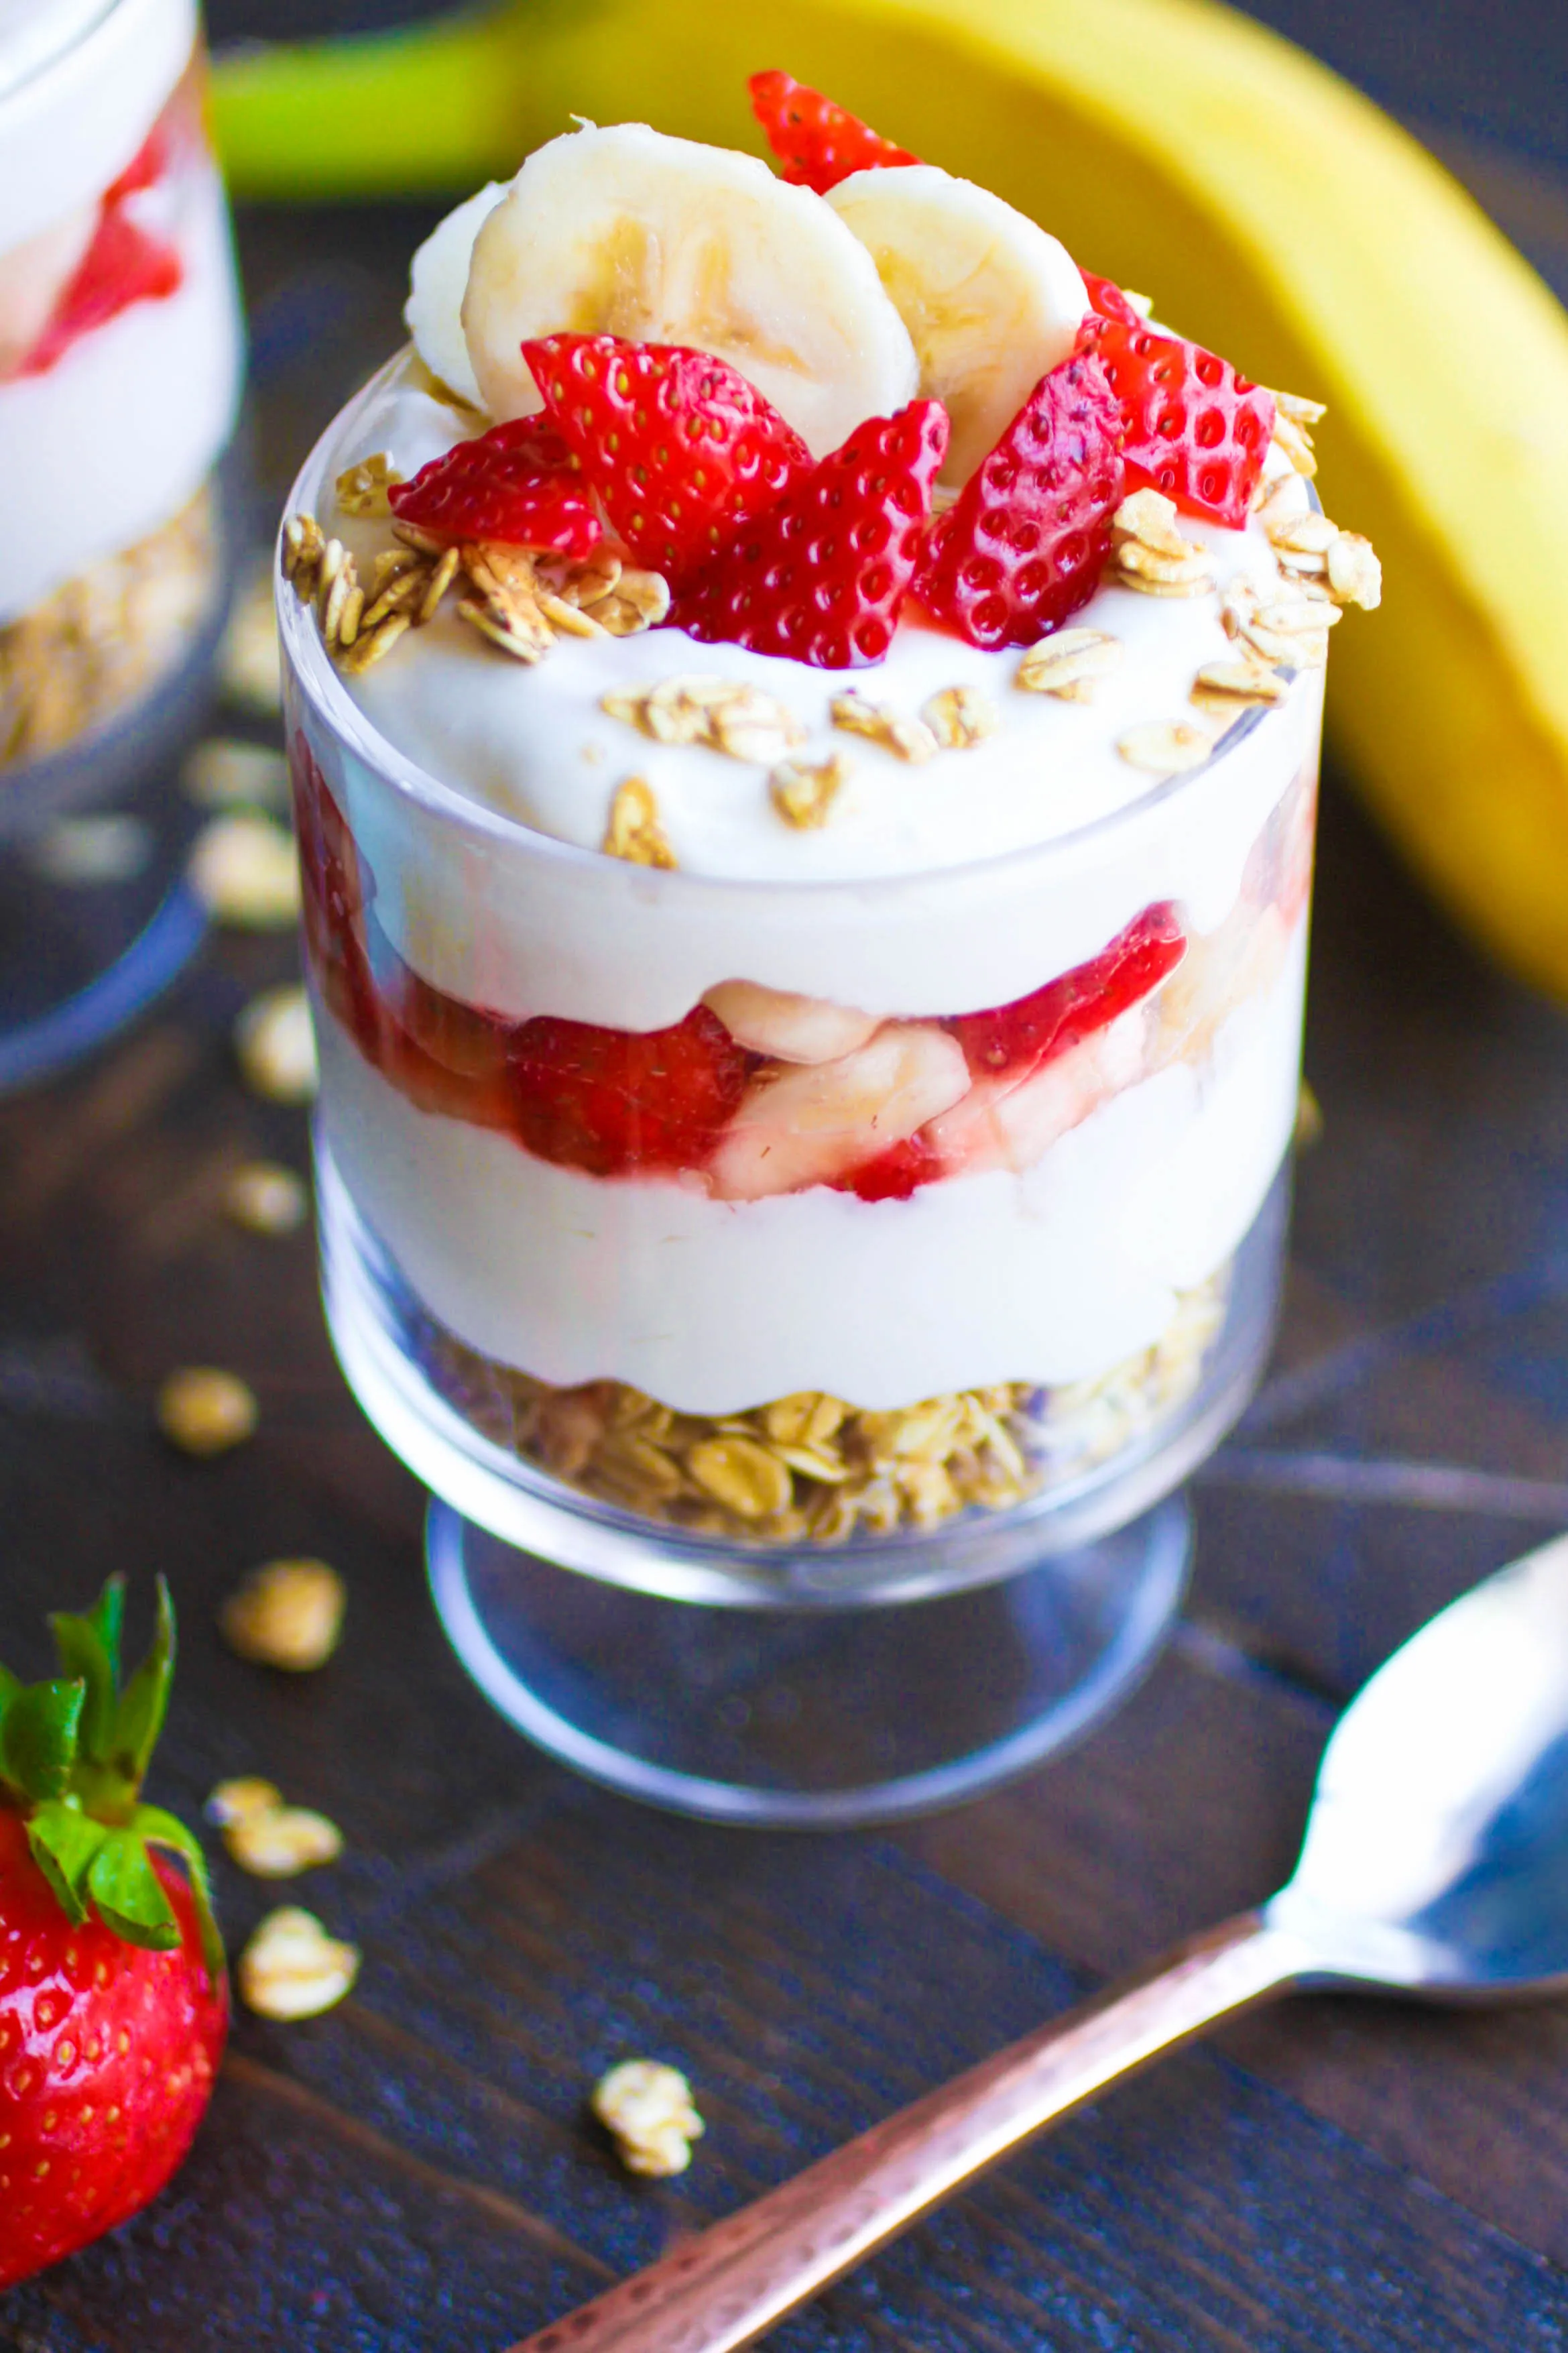 No Bake Strawberry-Banana Cheesecake Parfaits are the perfect treat for summer. No oven required to make No Bake Strawberry-Banana Cheesecake Parfaits!